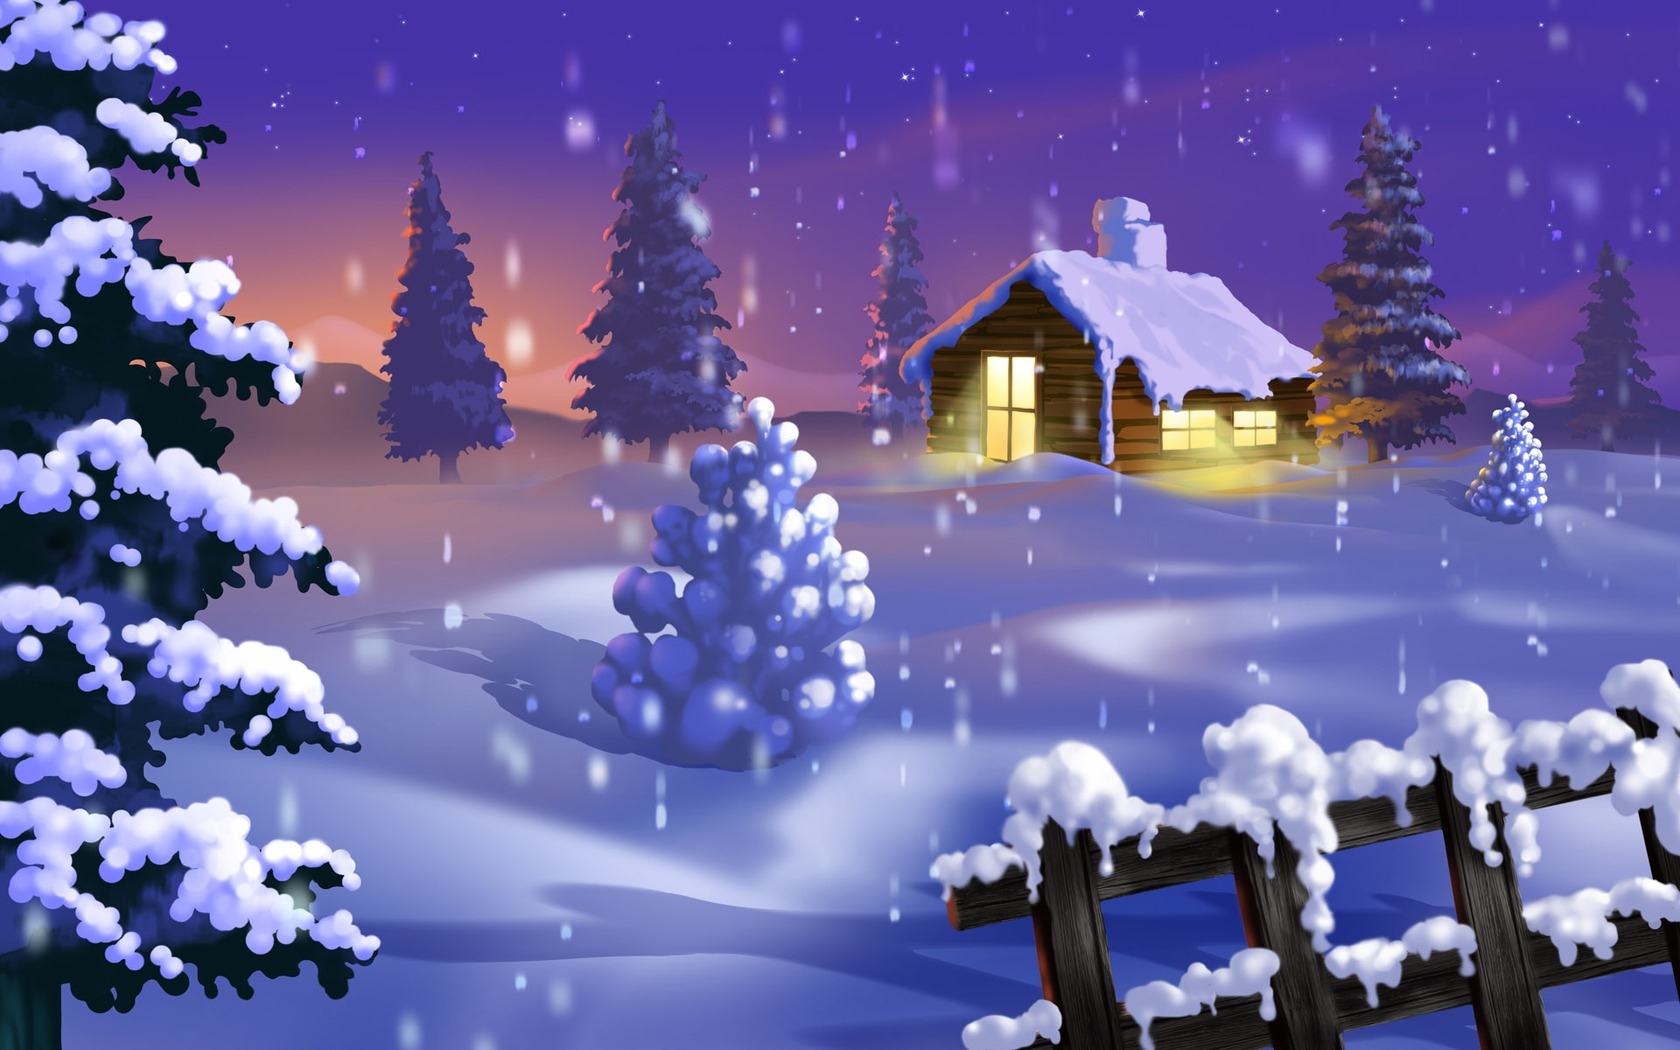 Download PC Wallpaper winter, houses, pictures, blue